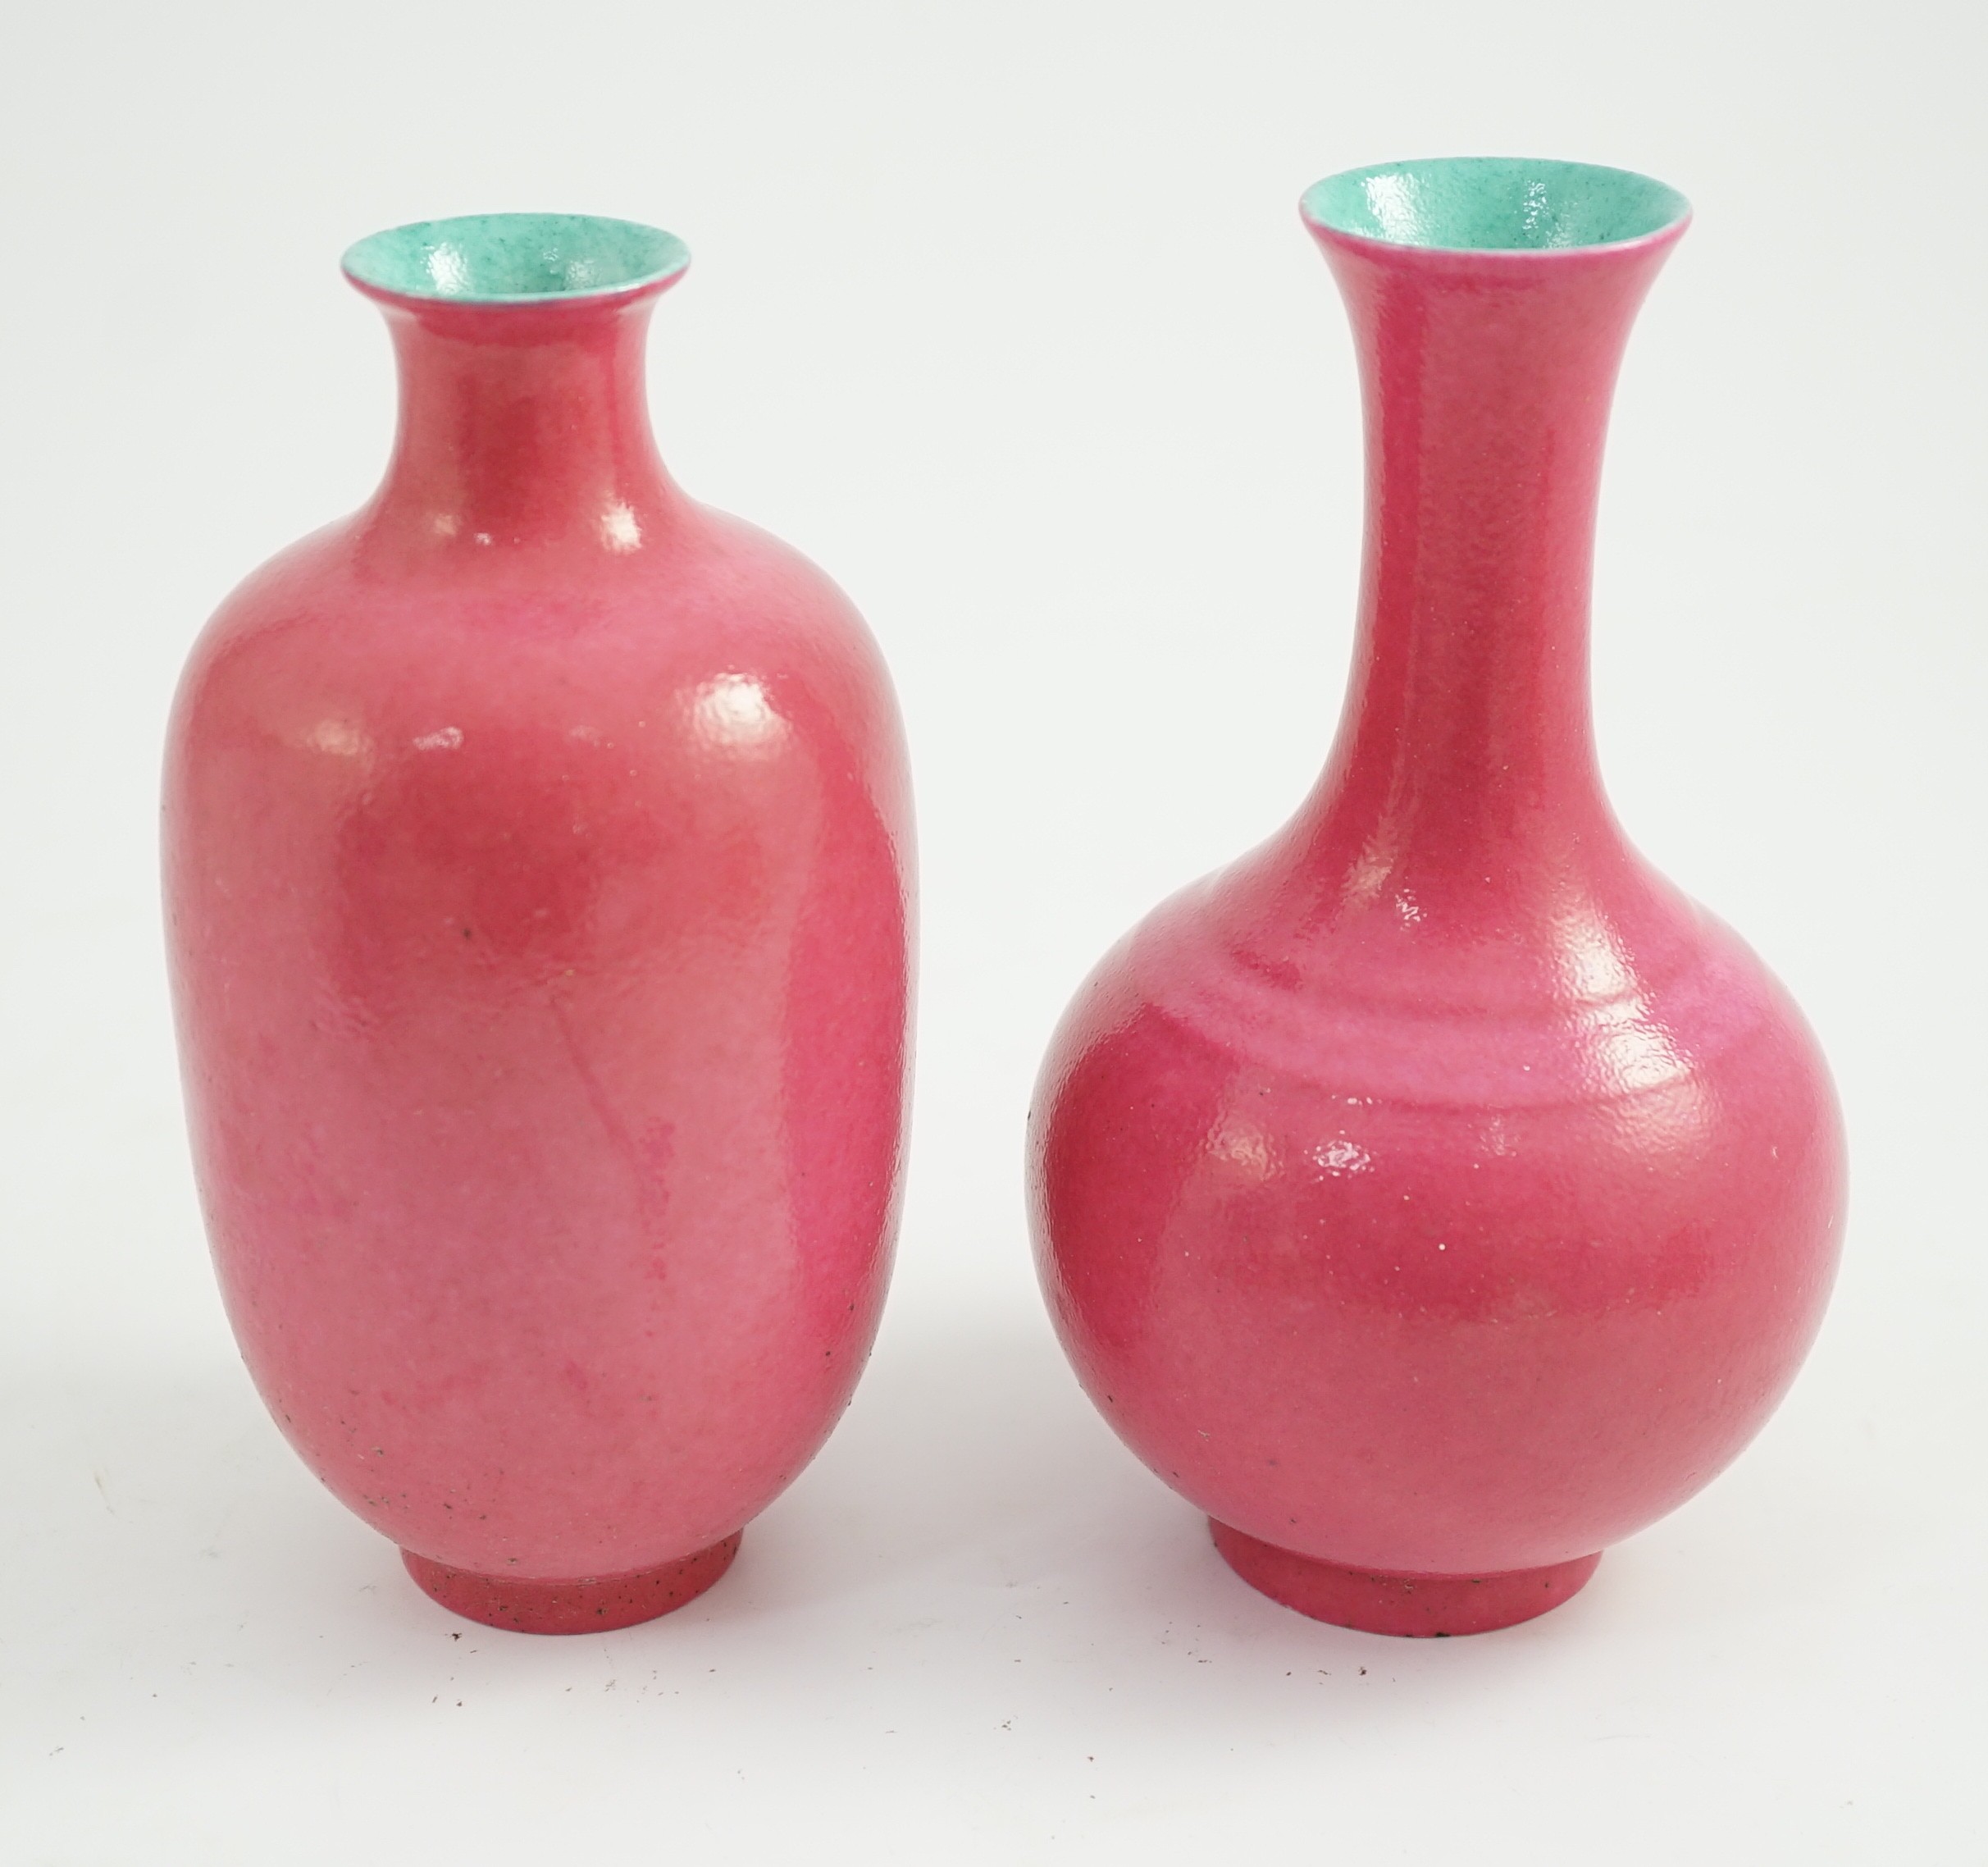 Two Chinese ruby ground vases, possibly Republic period, each with a printed four character Qianlong mark, 18.5 and 19.4cm high